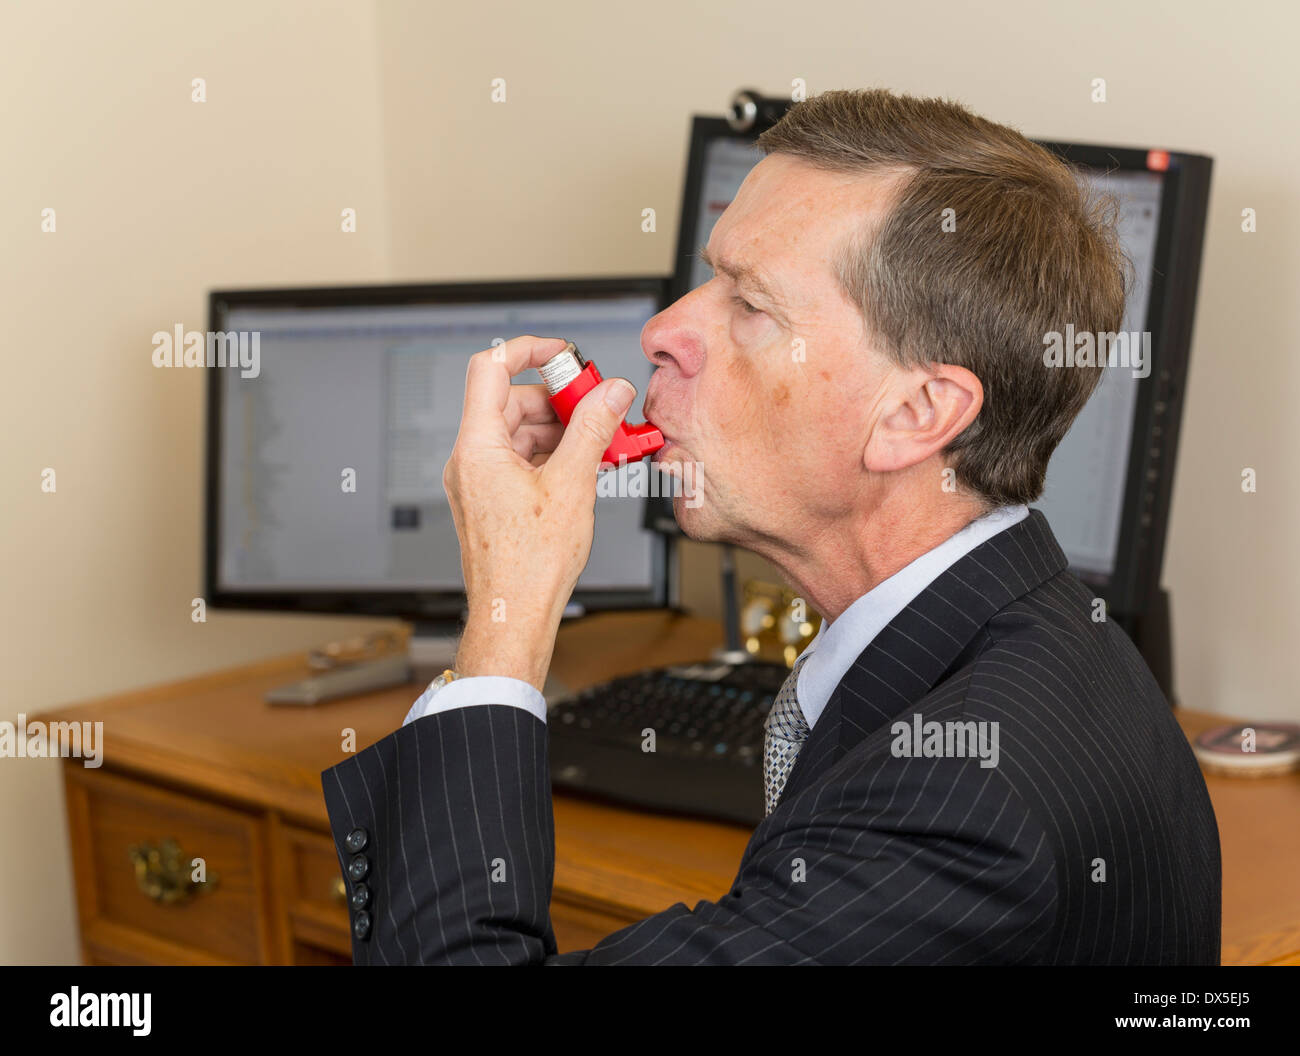 Businessman sitting at desk with computer screens using asthma inhaler Stock Photo